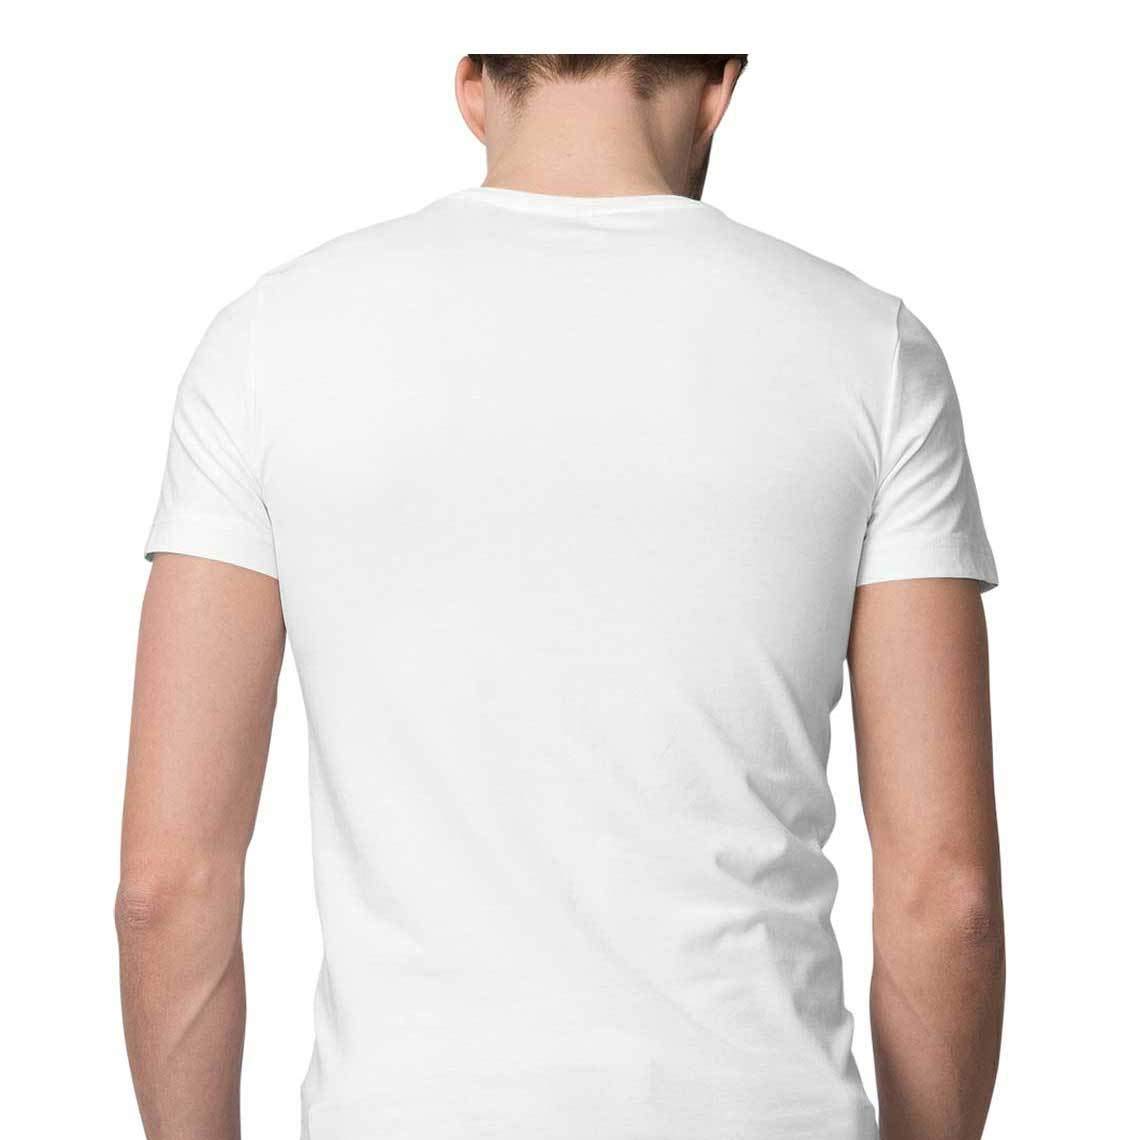 Fathers day Printed Tshirt for Men|Graphic Printed White t shirts for dads